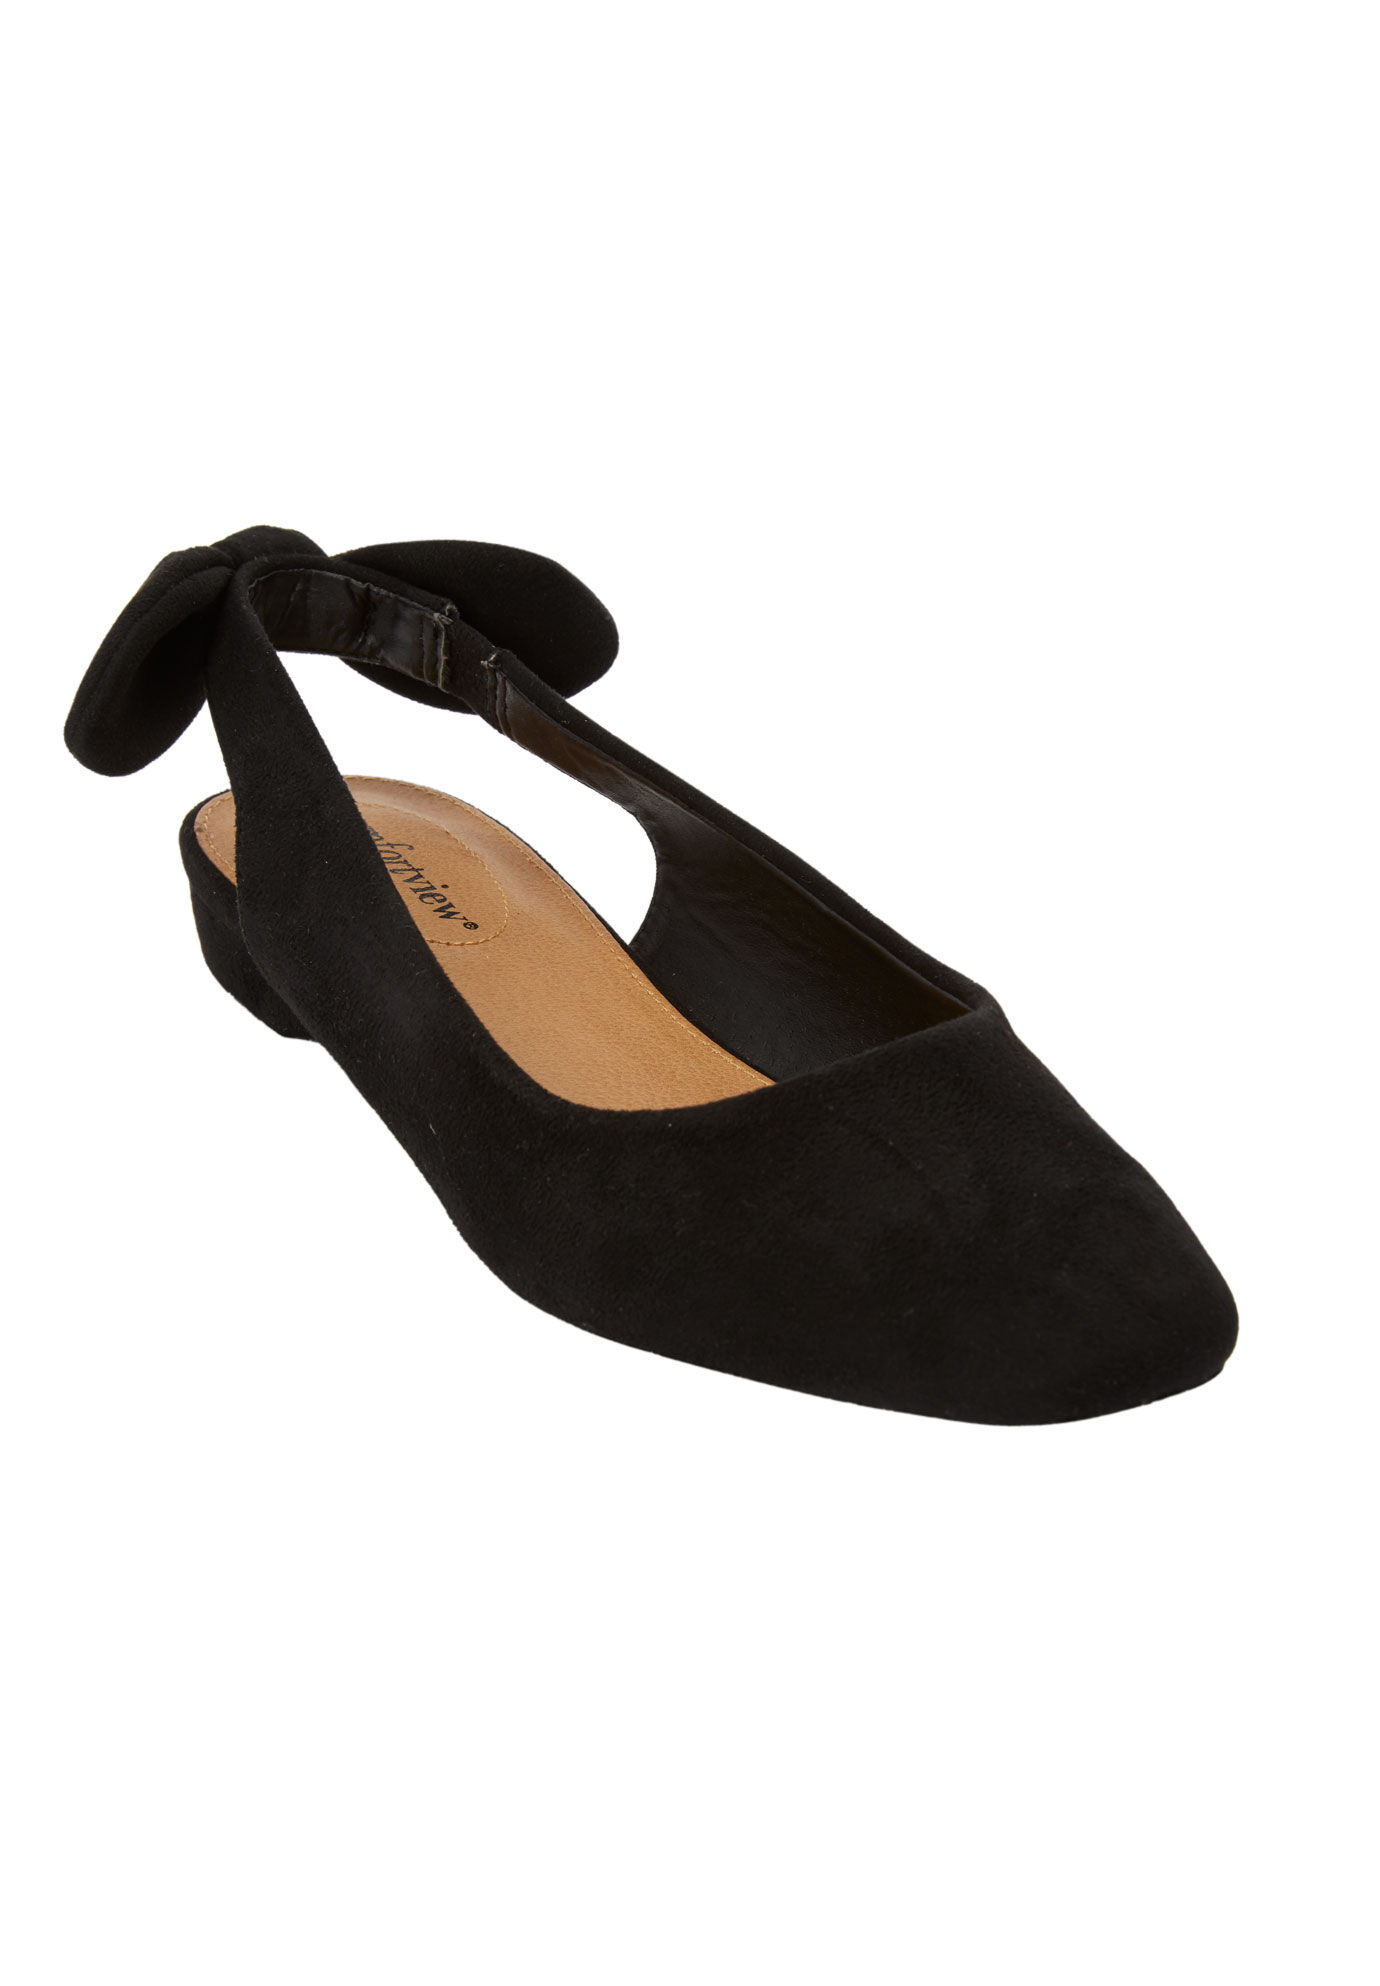 catherines wide width shoes